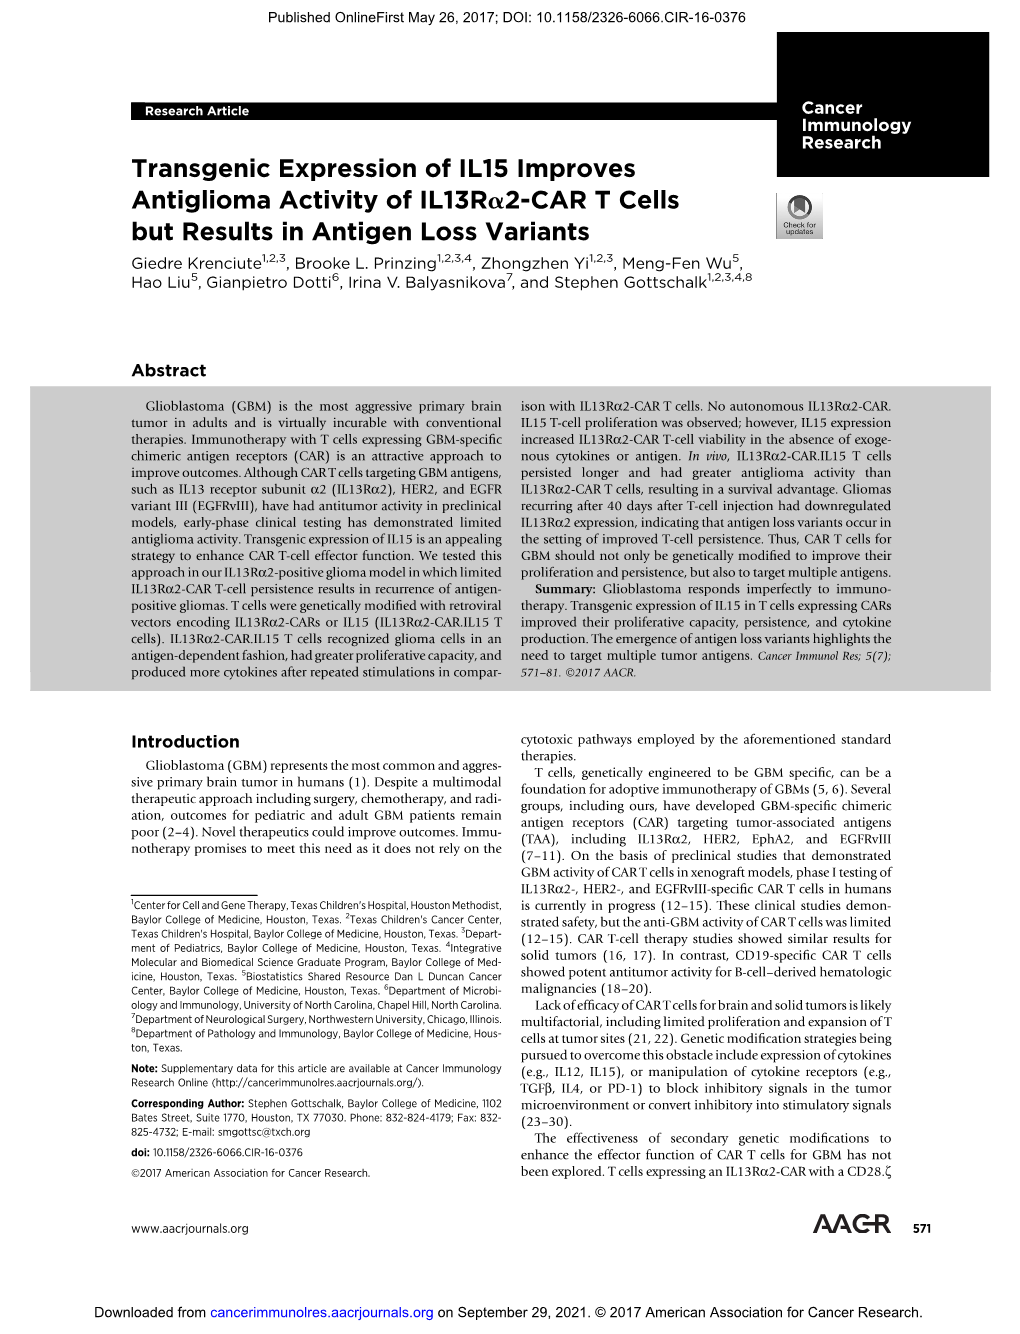 Transgenic Expression of IL15 Improves Antiglioma Activity of Il13ra2-CAR T Cells but Results in Antigen Loss Variants Giedre Krenciute1,2,3, Brooke L